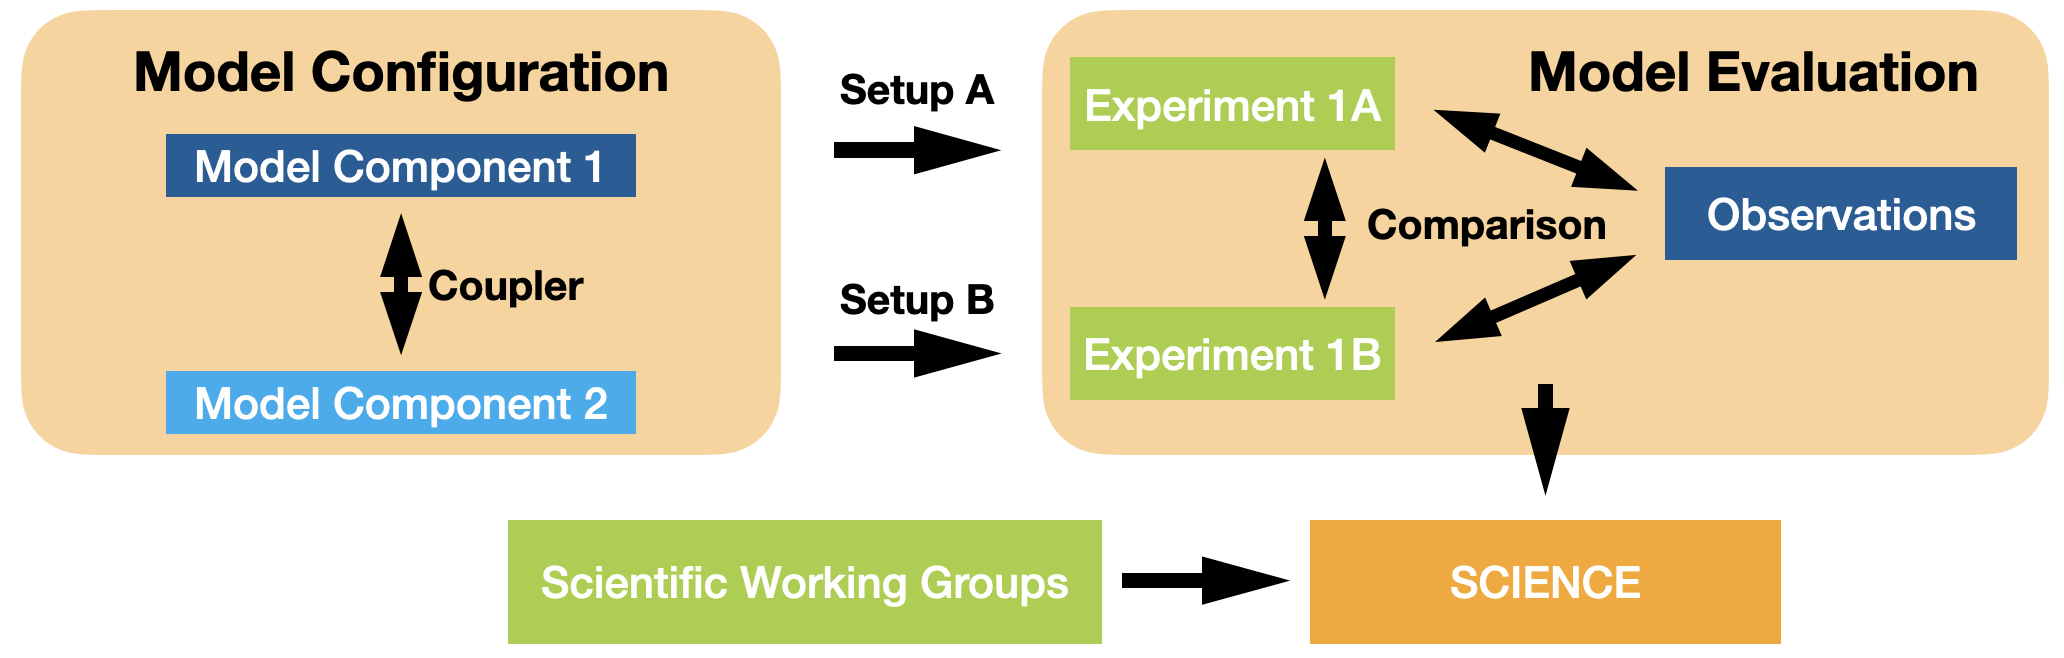 Diagram showing how running ACCESS model configurations with different setups create different experiments. These are then compared with each other and observational data as part of the model evaluation. These comparisons are what informs climate science.